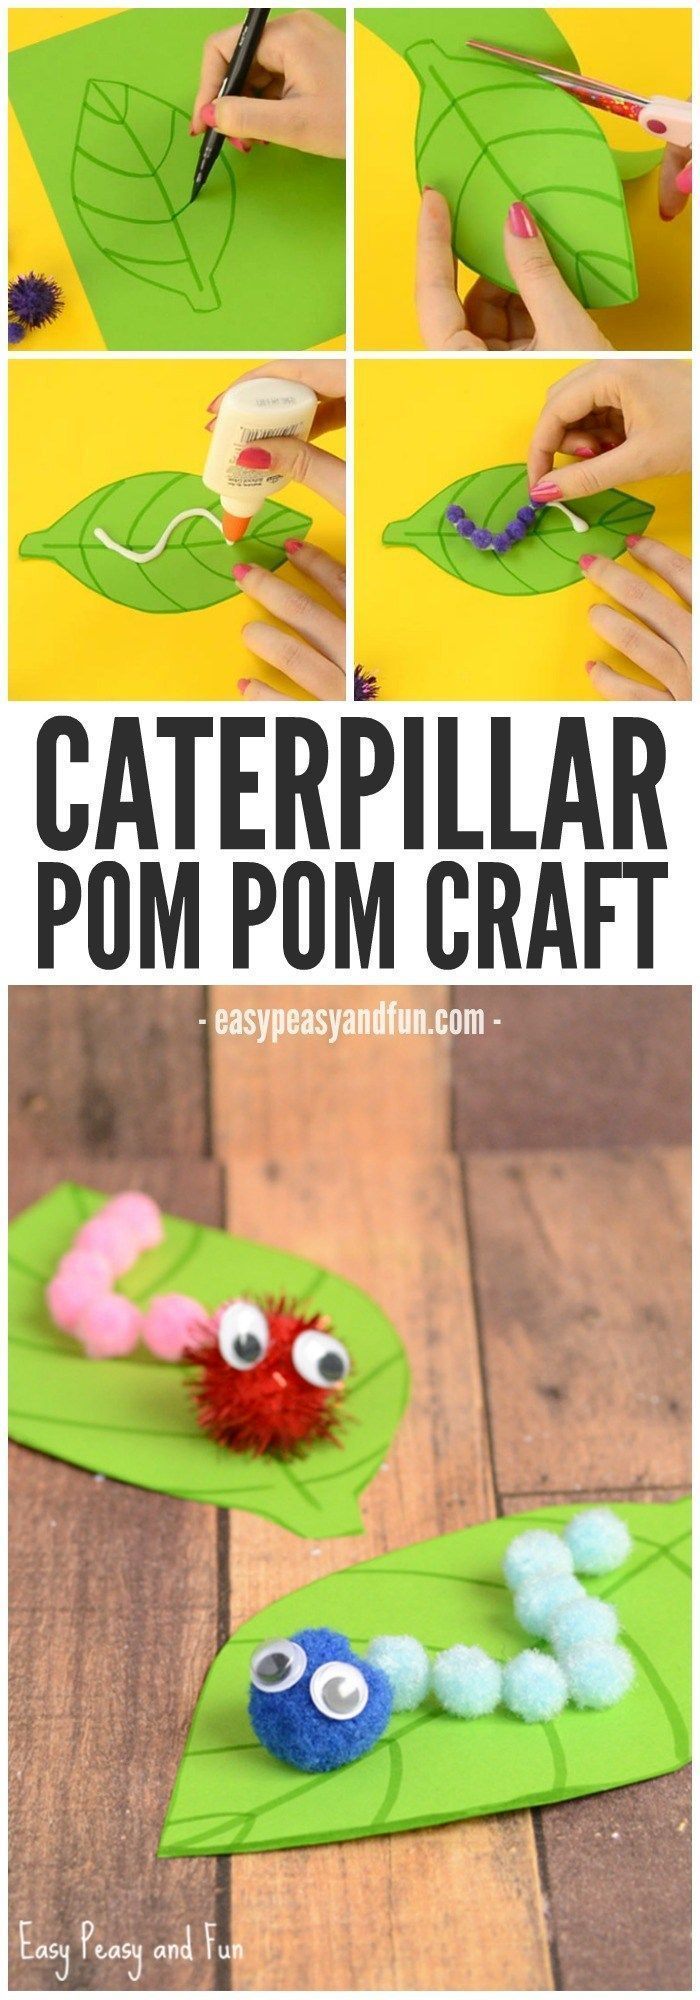 over 20 Spring crafts that kids can make – www.kidfriendlyth…